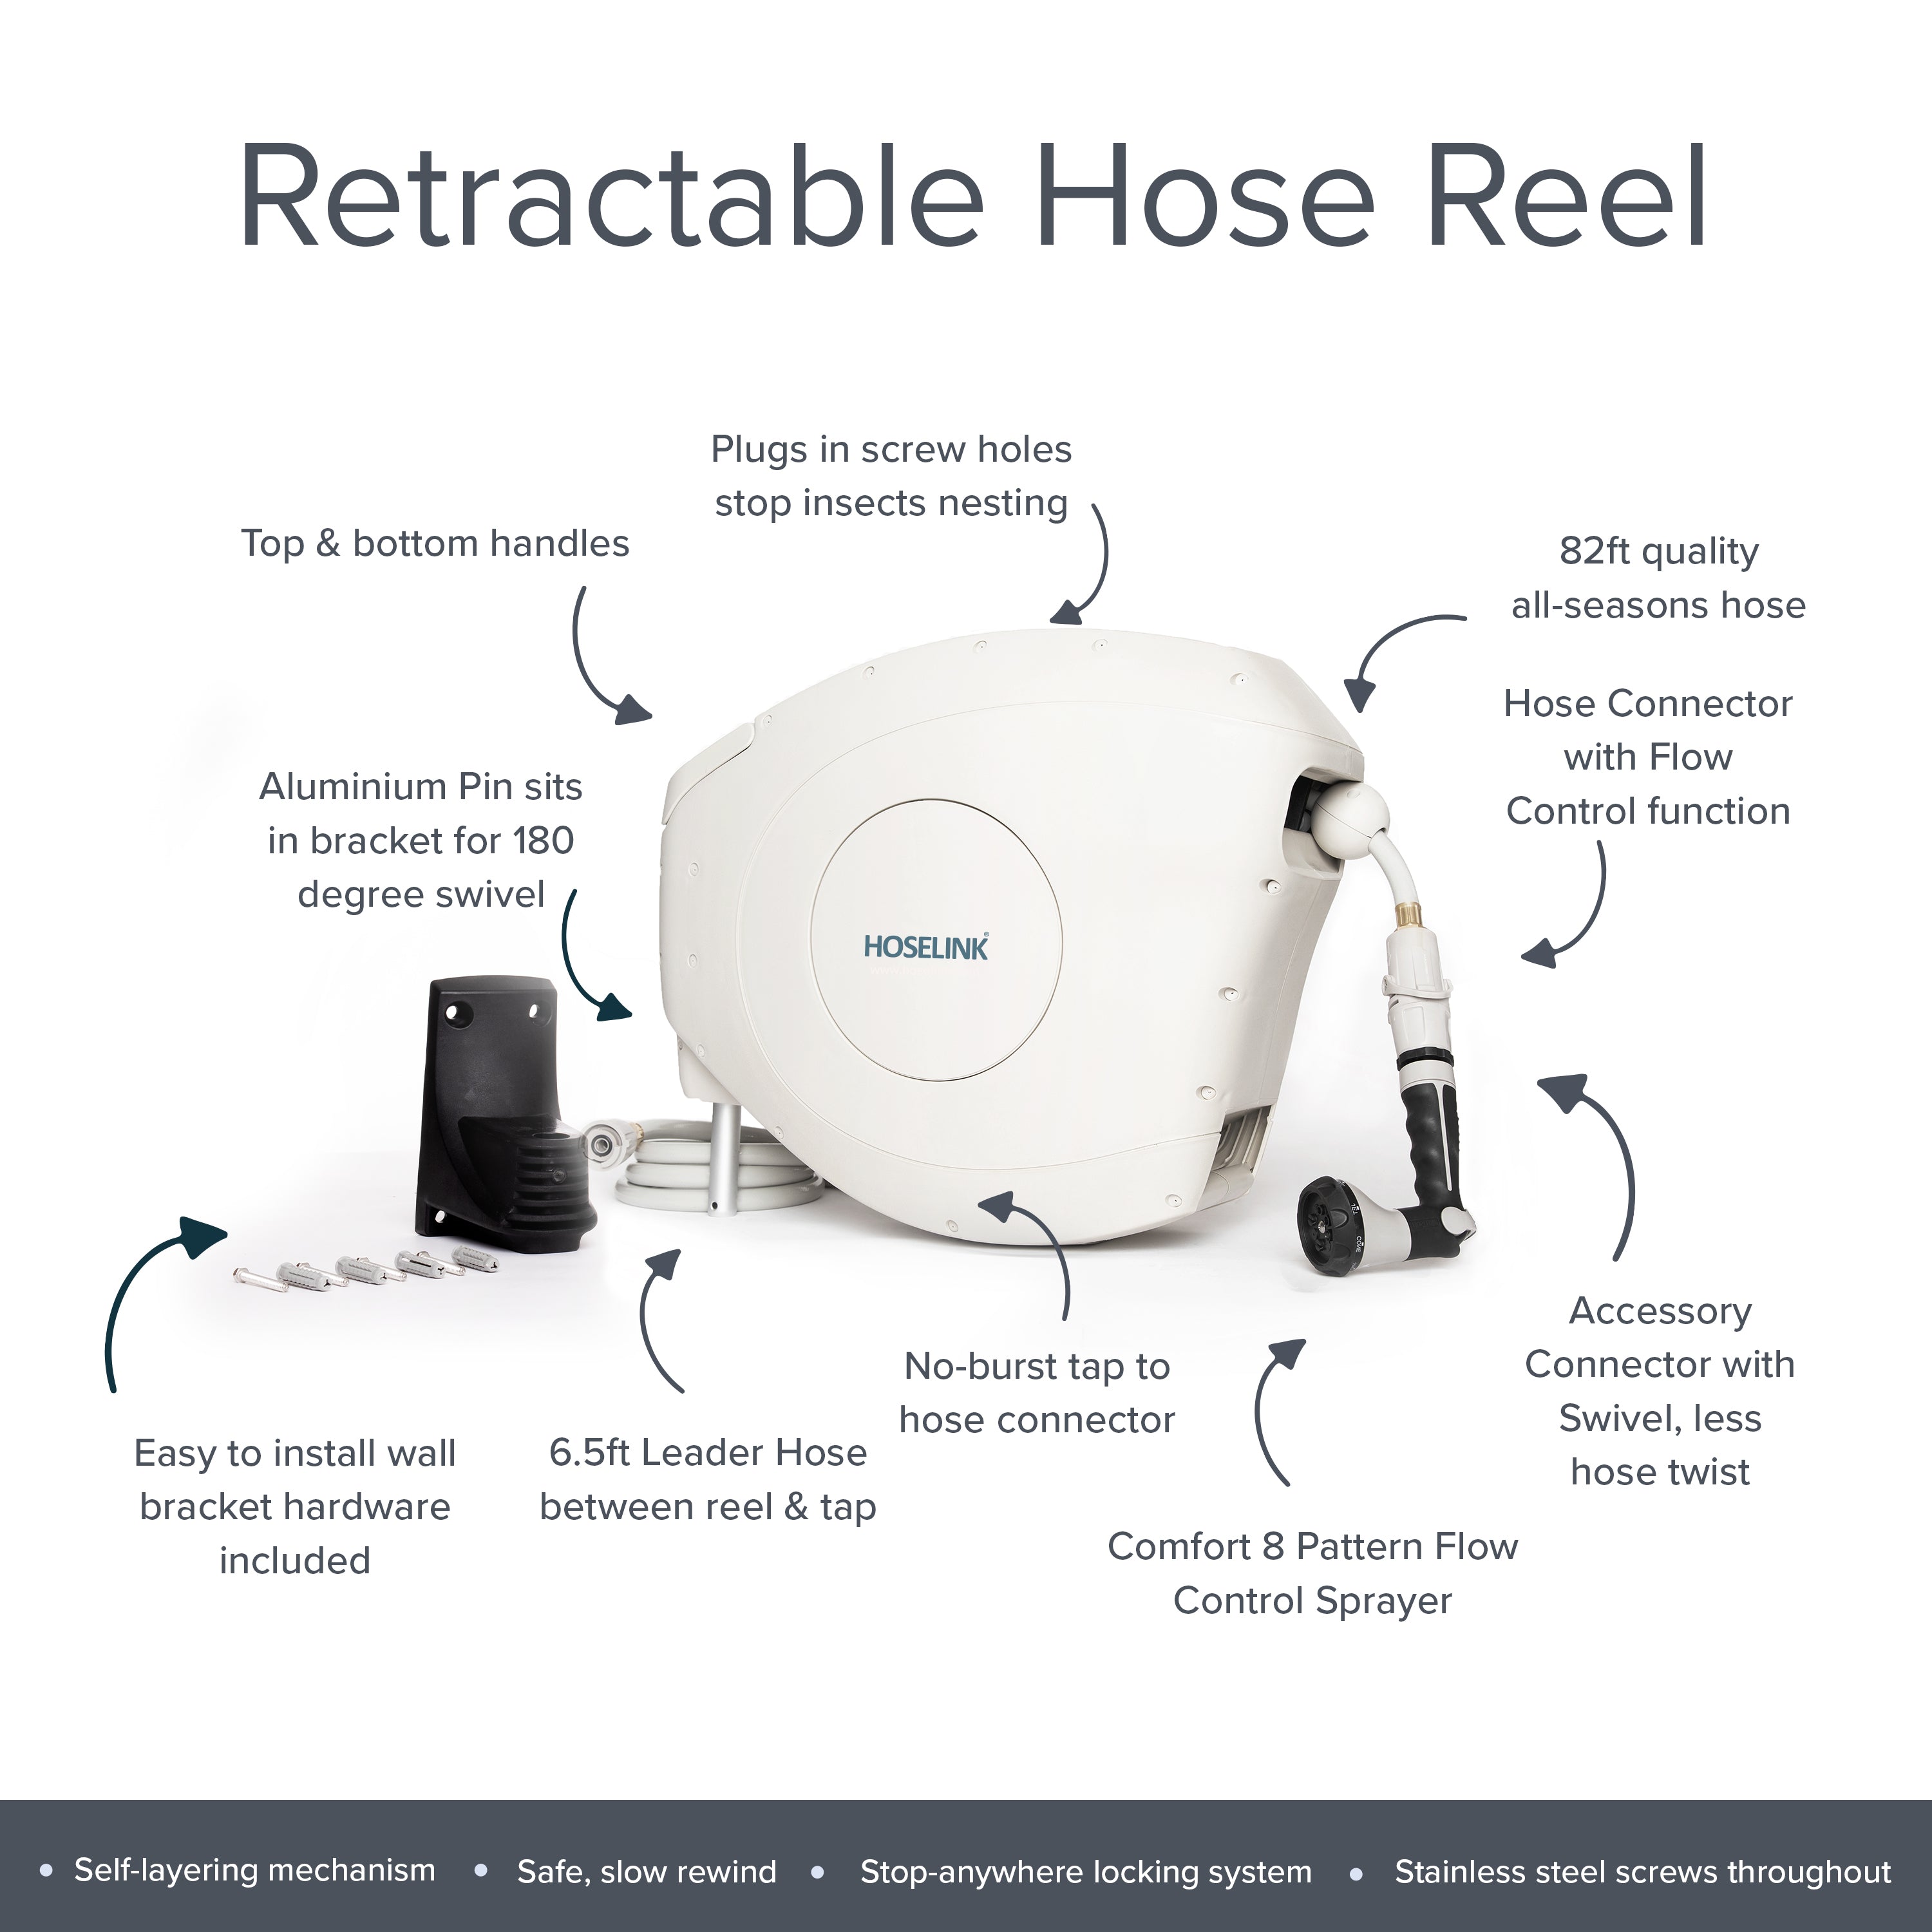 Hoselink Retractable Hose Reel 82 Feet For Sale In USA, 41% OFF